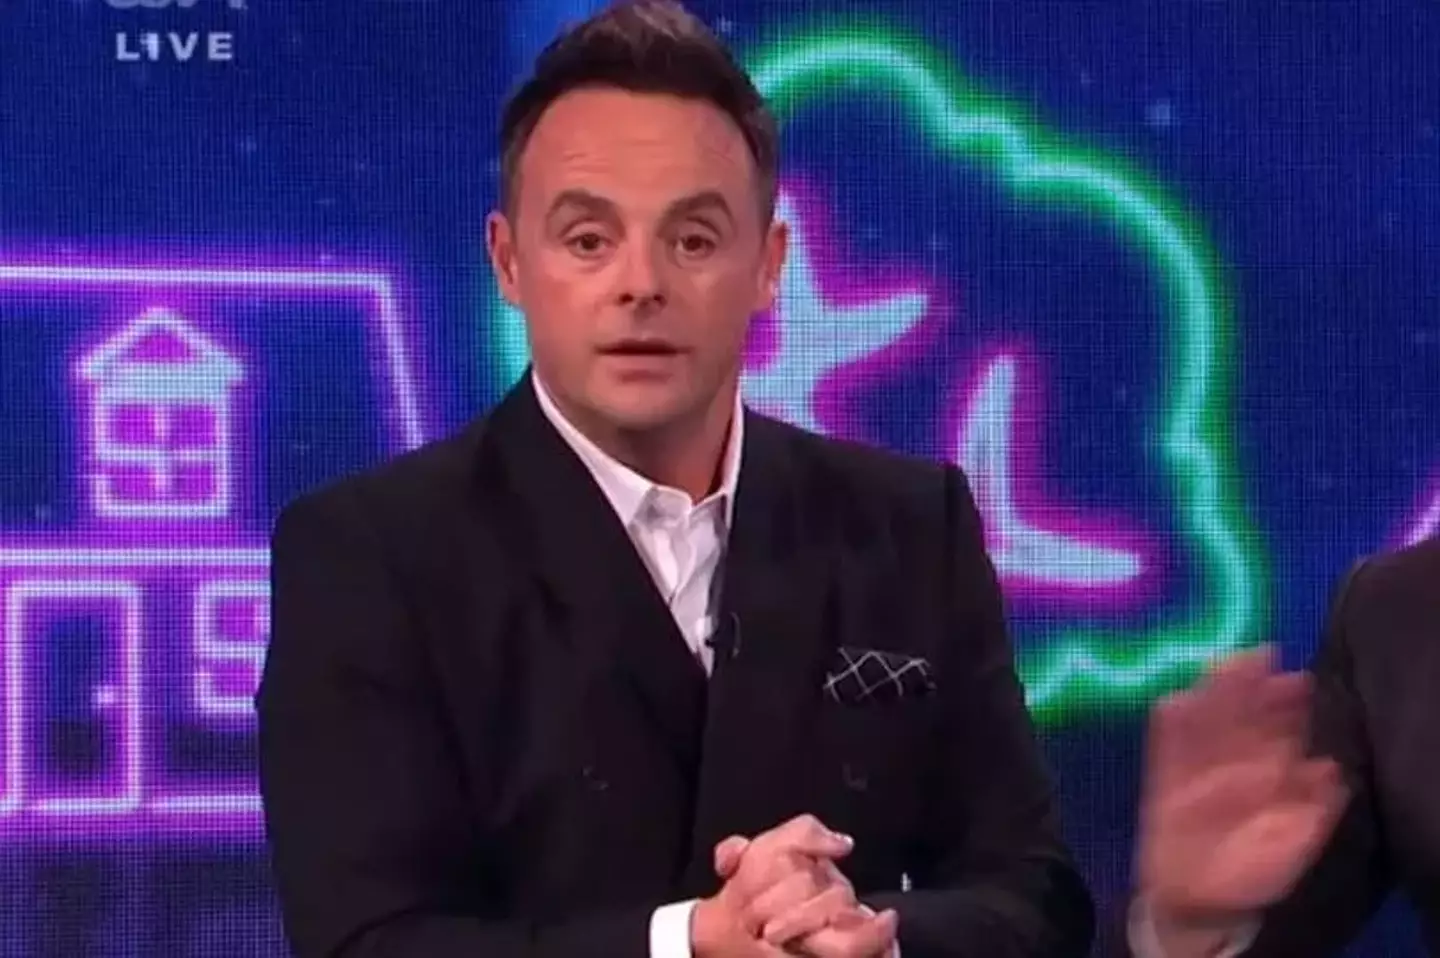 Ant McPartlin hilariously ended up telling one of the Ring My Bell stars to 'shut up'.